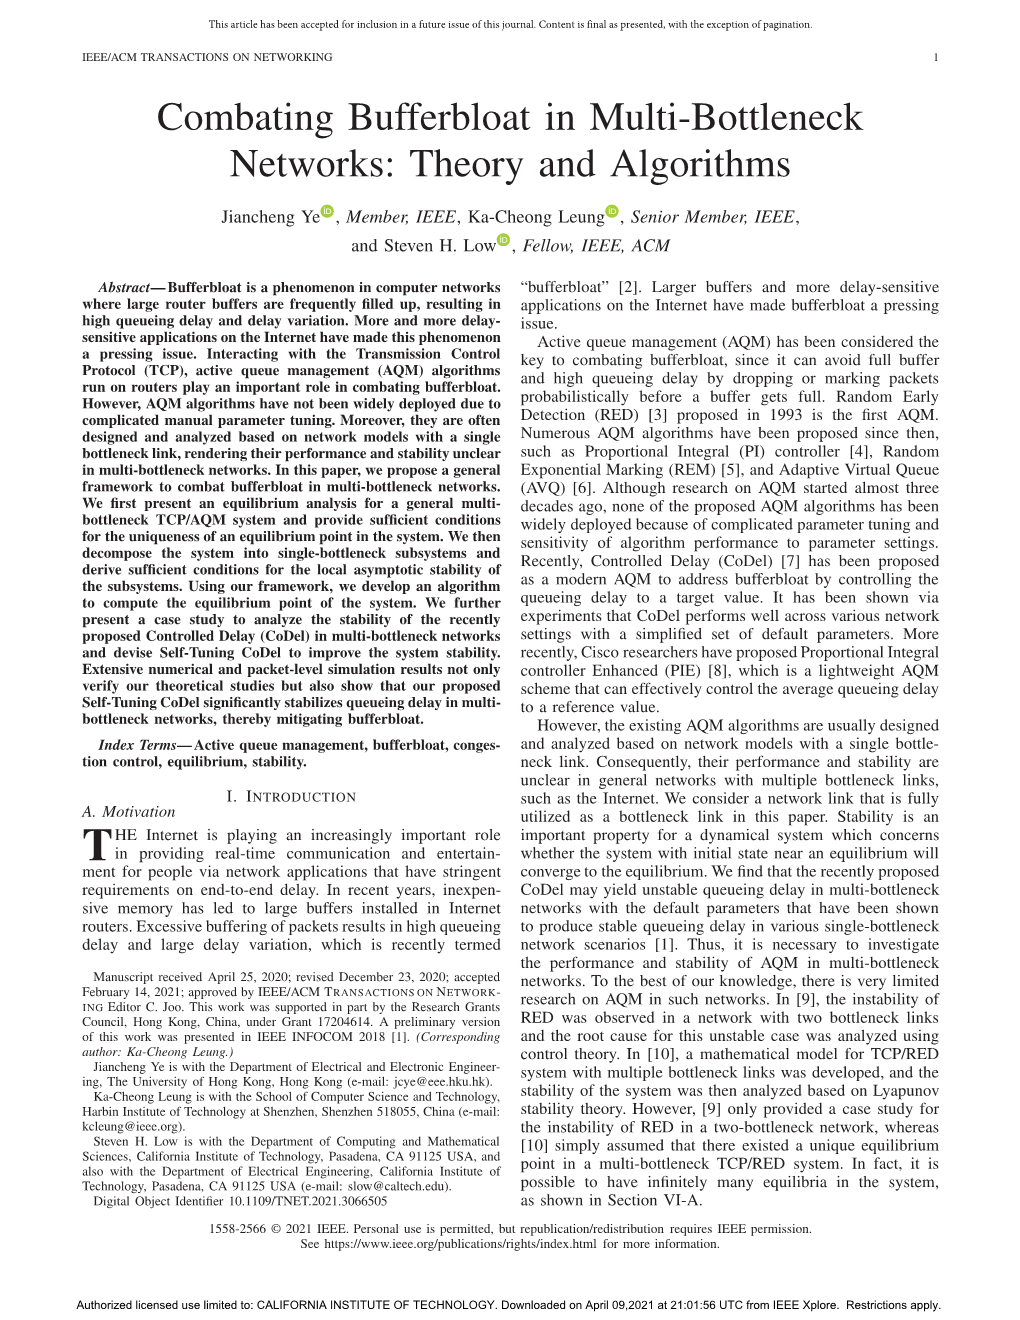 Combating Bufferbloat in Multi-Bottleneck Networks: Theory and Algorithms